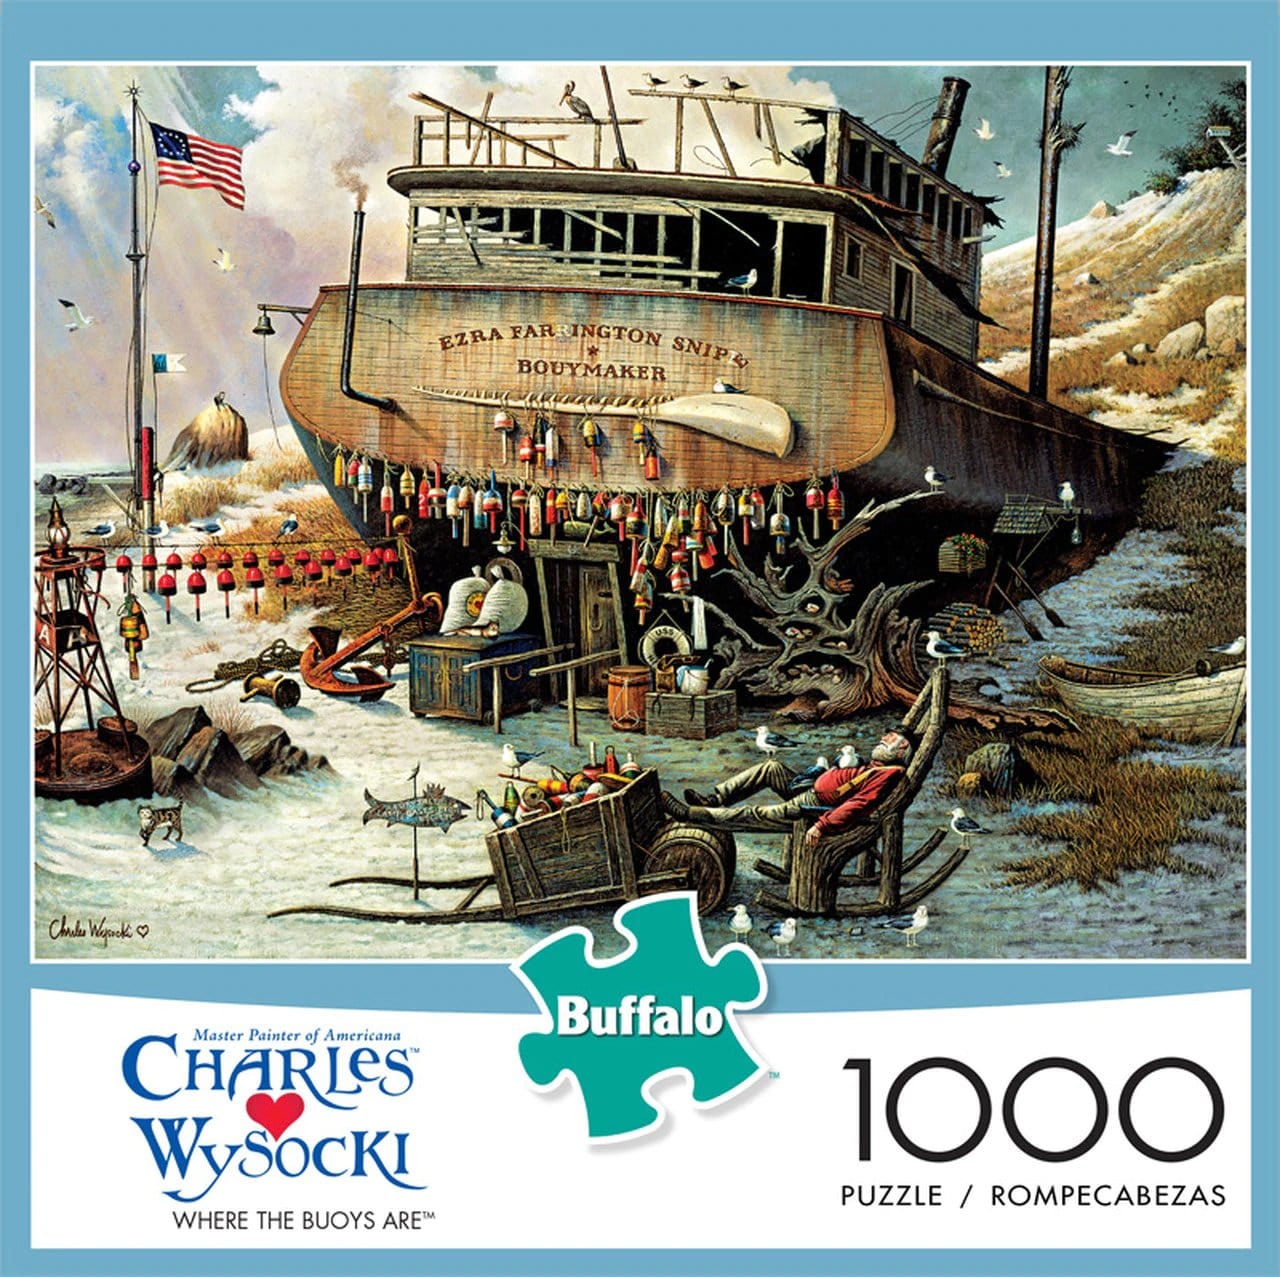 CLASSIC BOAT JIGSAW PUZZLE - Where the Buoys Are - By Charles Wysocki - 1000 PCS